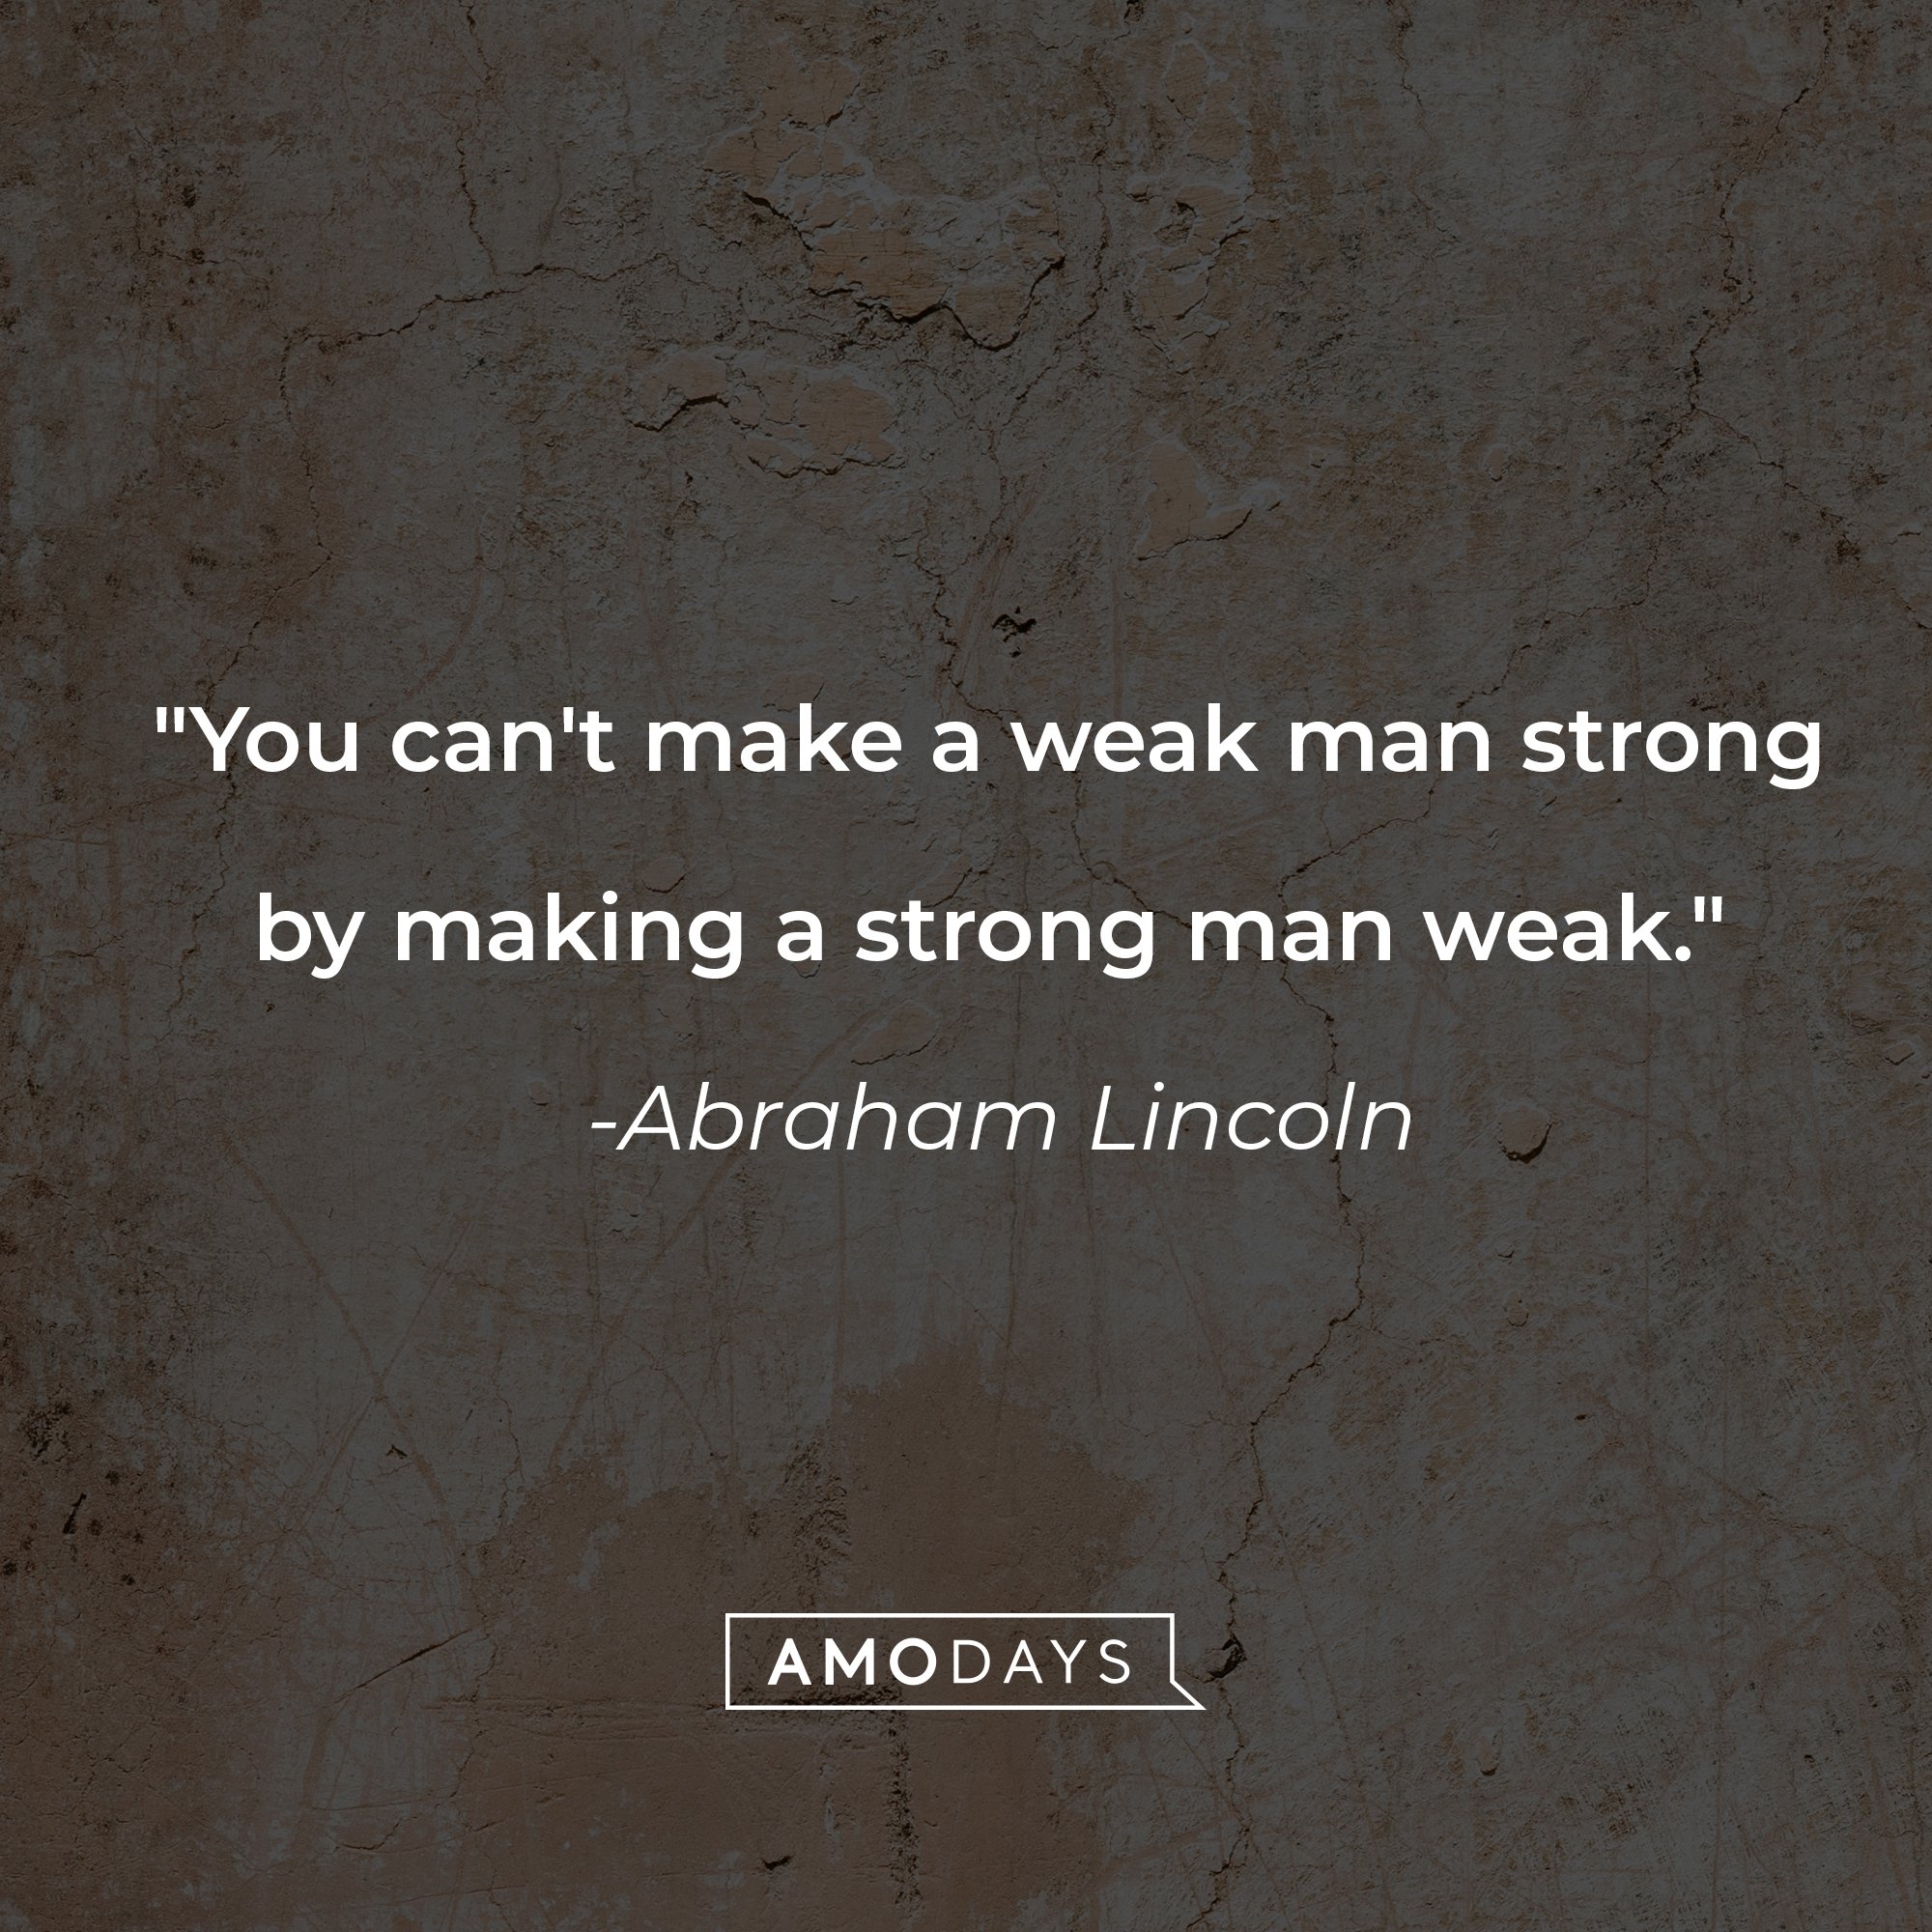 Abraham Lincoln's quote: "You can't make a weak man strong by making a strong man weak." | Image: AmoDays